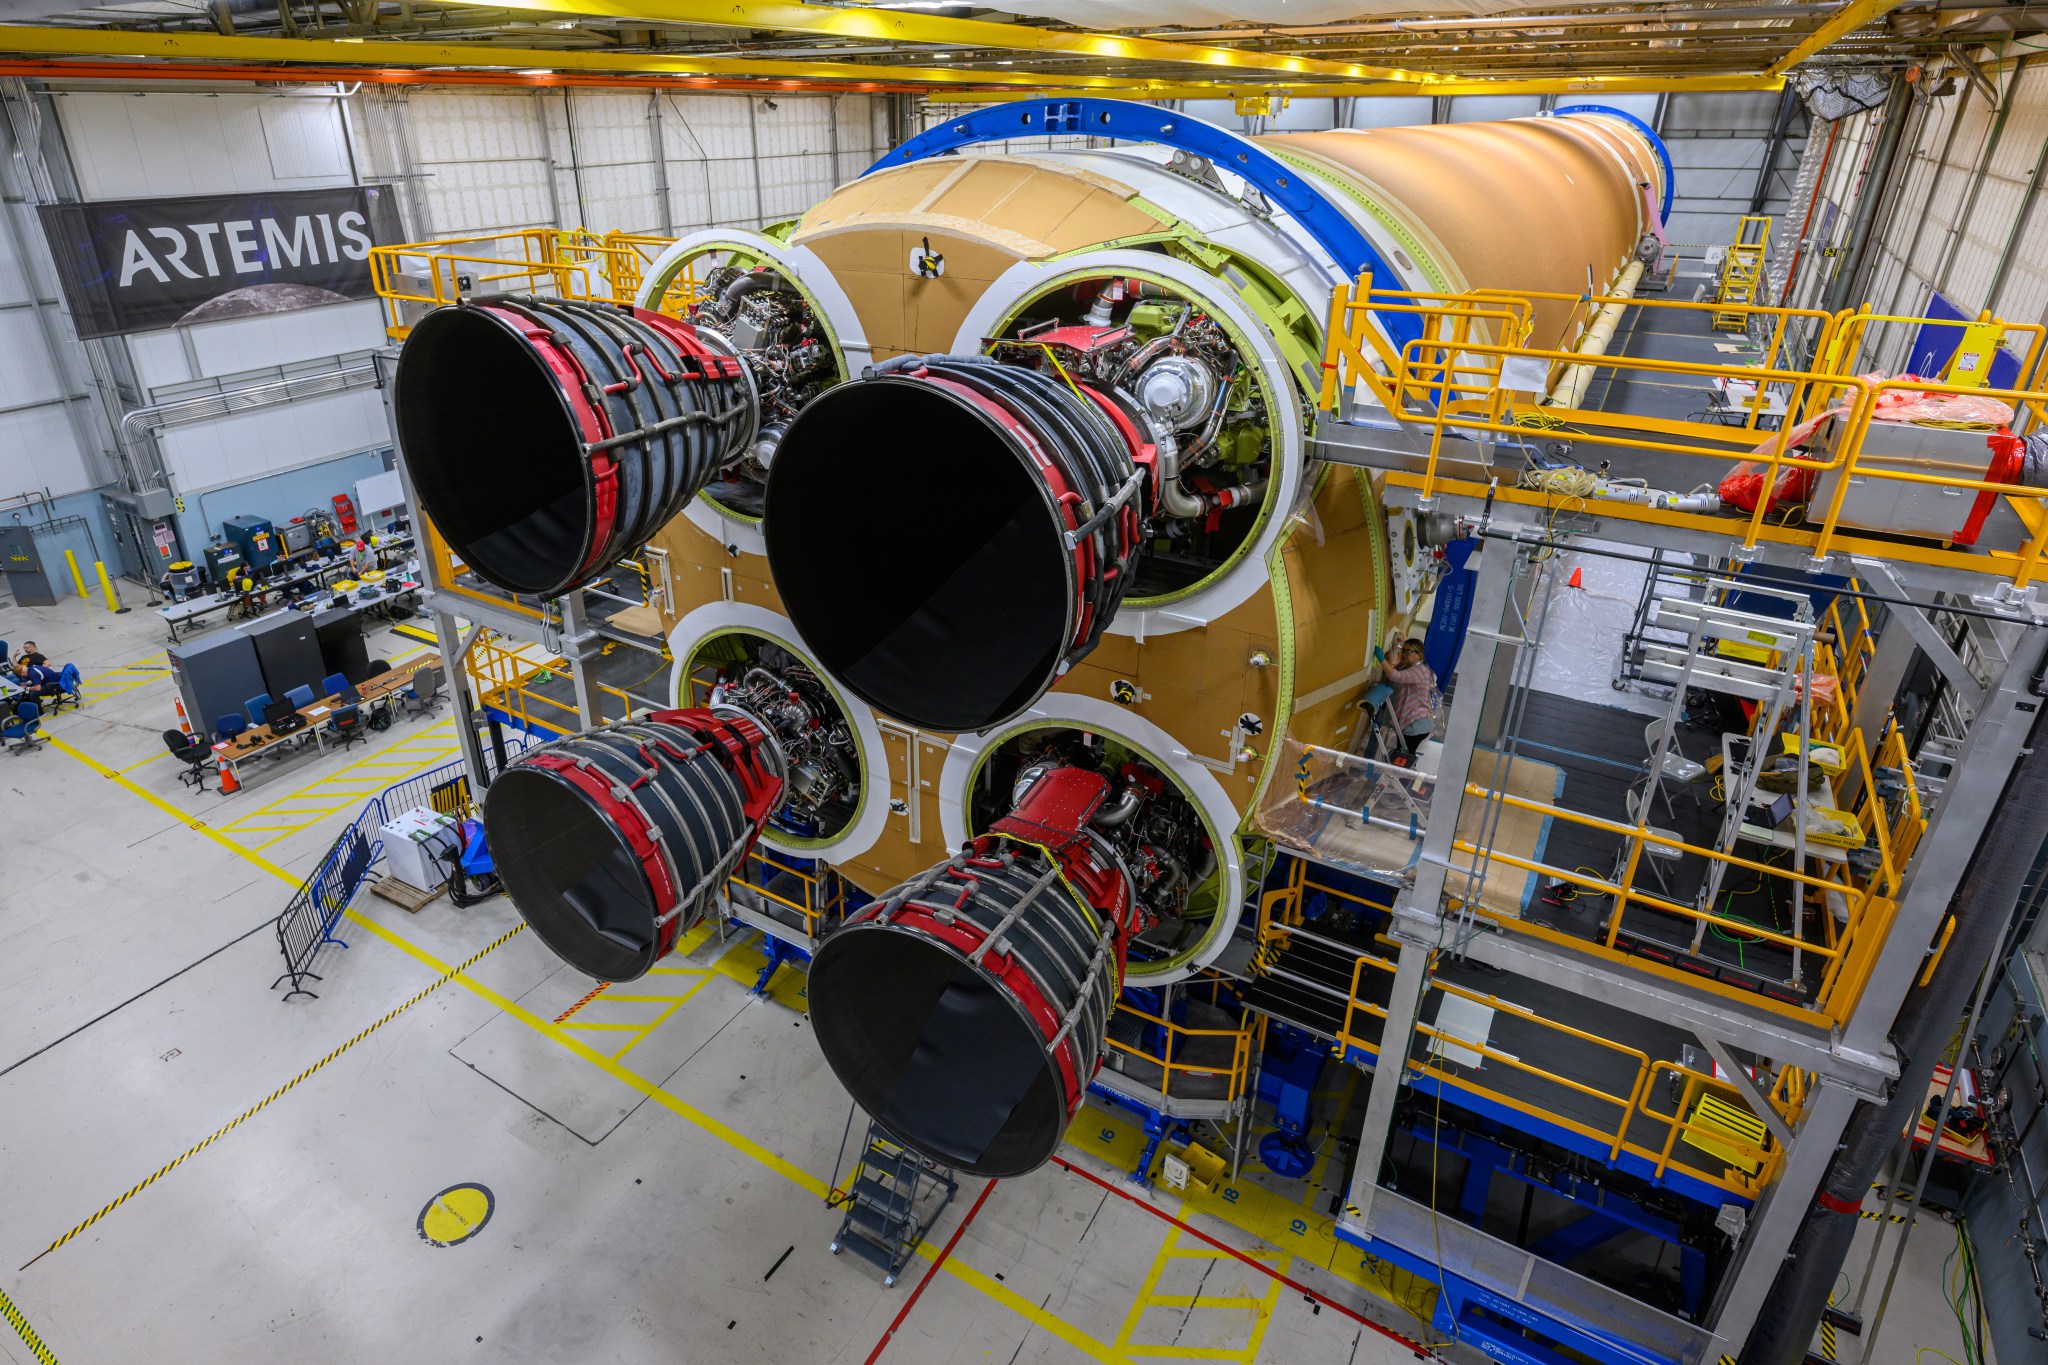 Engineers and technicians from NASA, Aerojet Rocketdyne, and Boeing at NASA’s Michoud Assembly Facility in New Orleans have installed all four RS-25 engines to the core stage for NASA’s Space Launch System rocket that will help power the first crewed Artemis mission to the Moon. The yellow core stage is seen in a horizontal position in the final assembly area at Michoud. The engines are arranged at the bottom of the rocket stage in a square pattern, like legs on a table. 